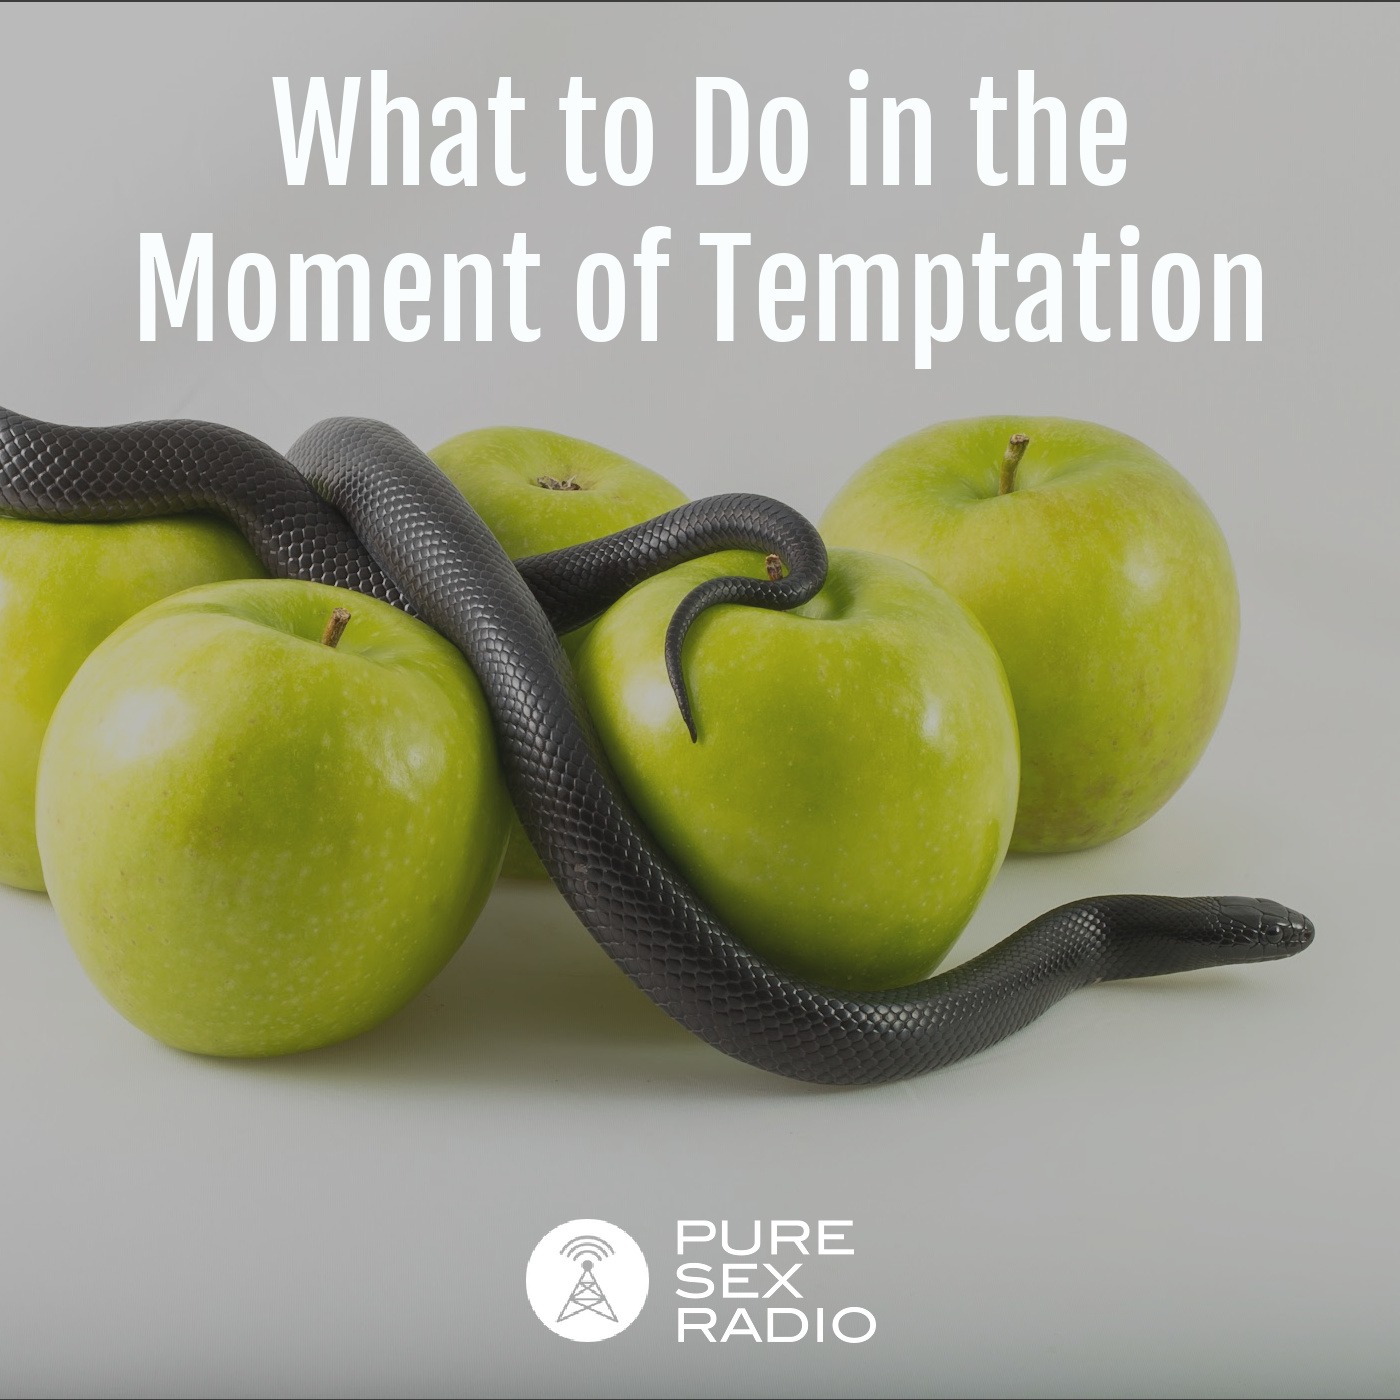 What to Do in the Moment of Temptation